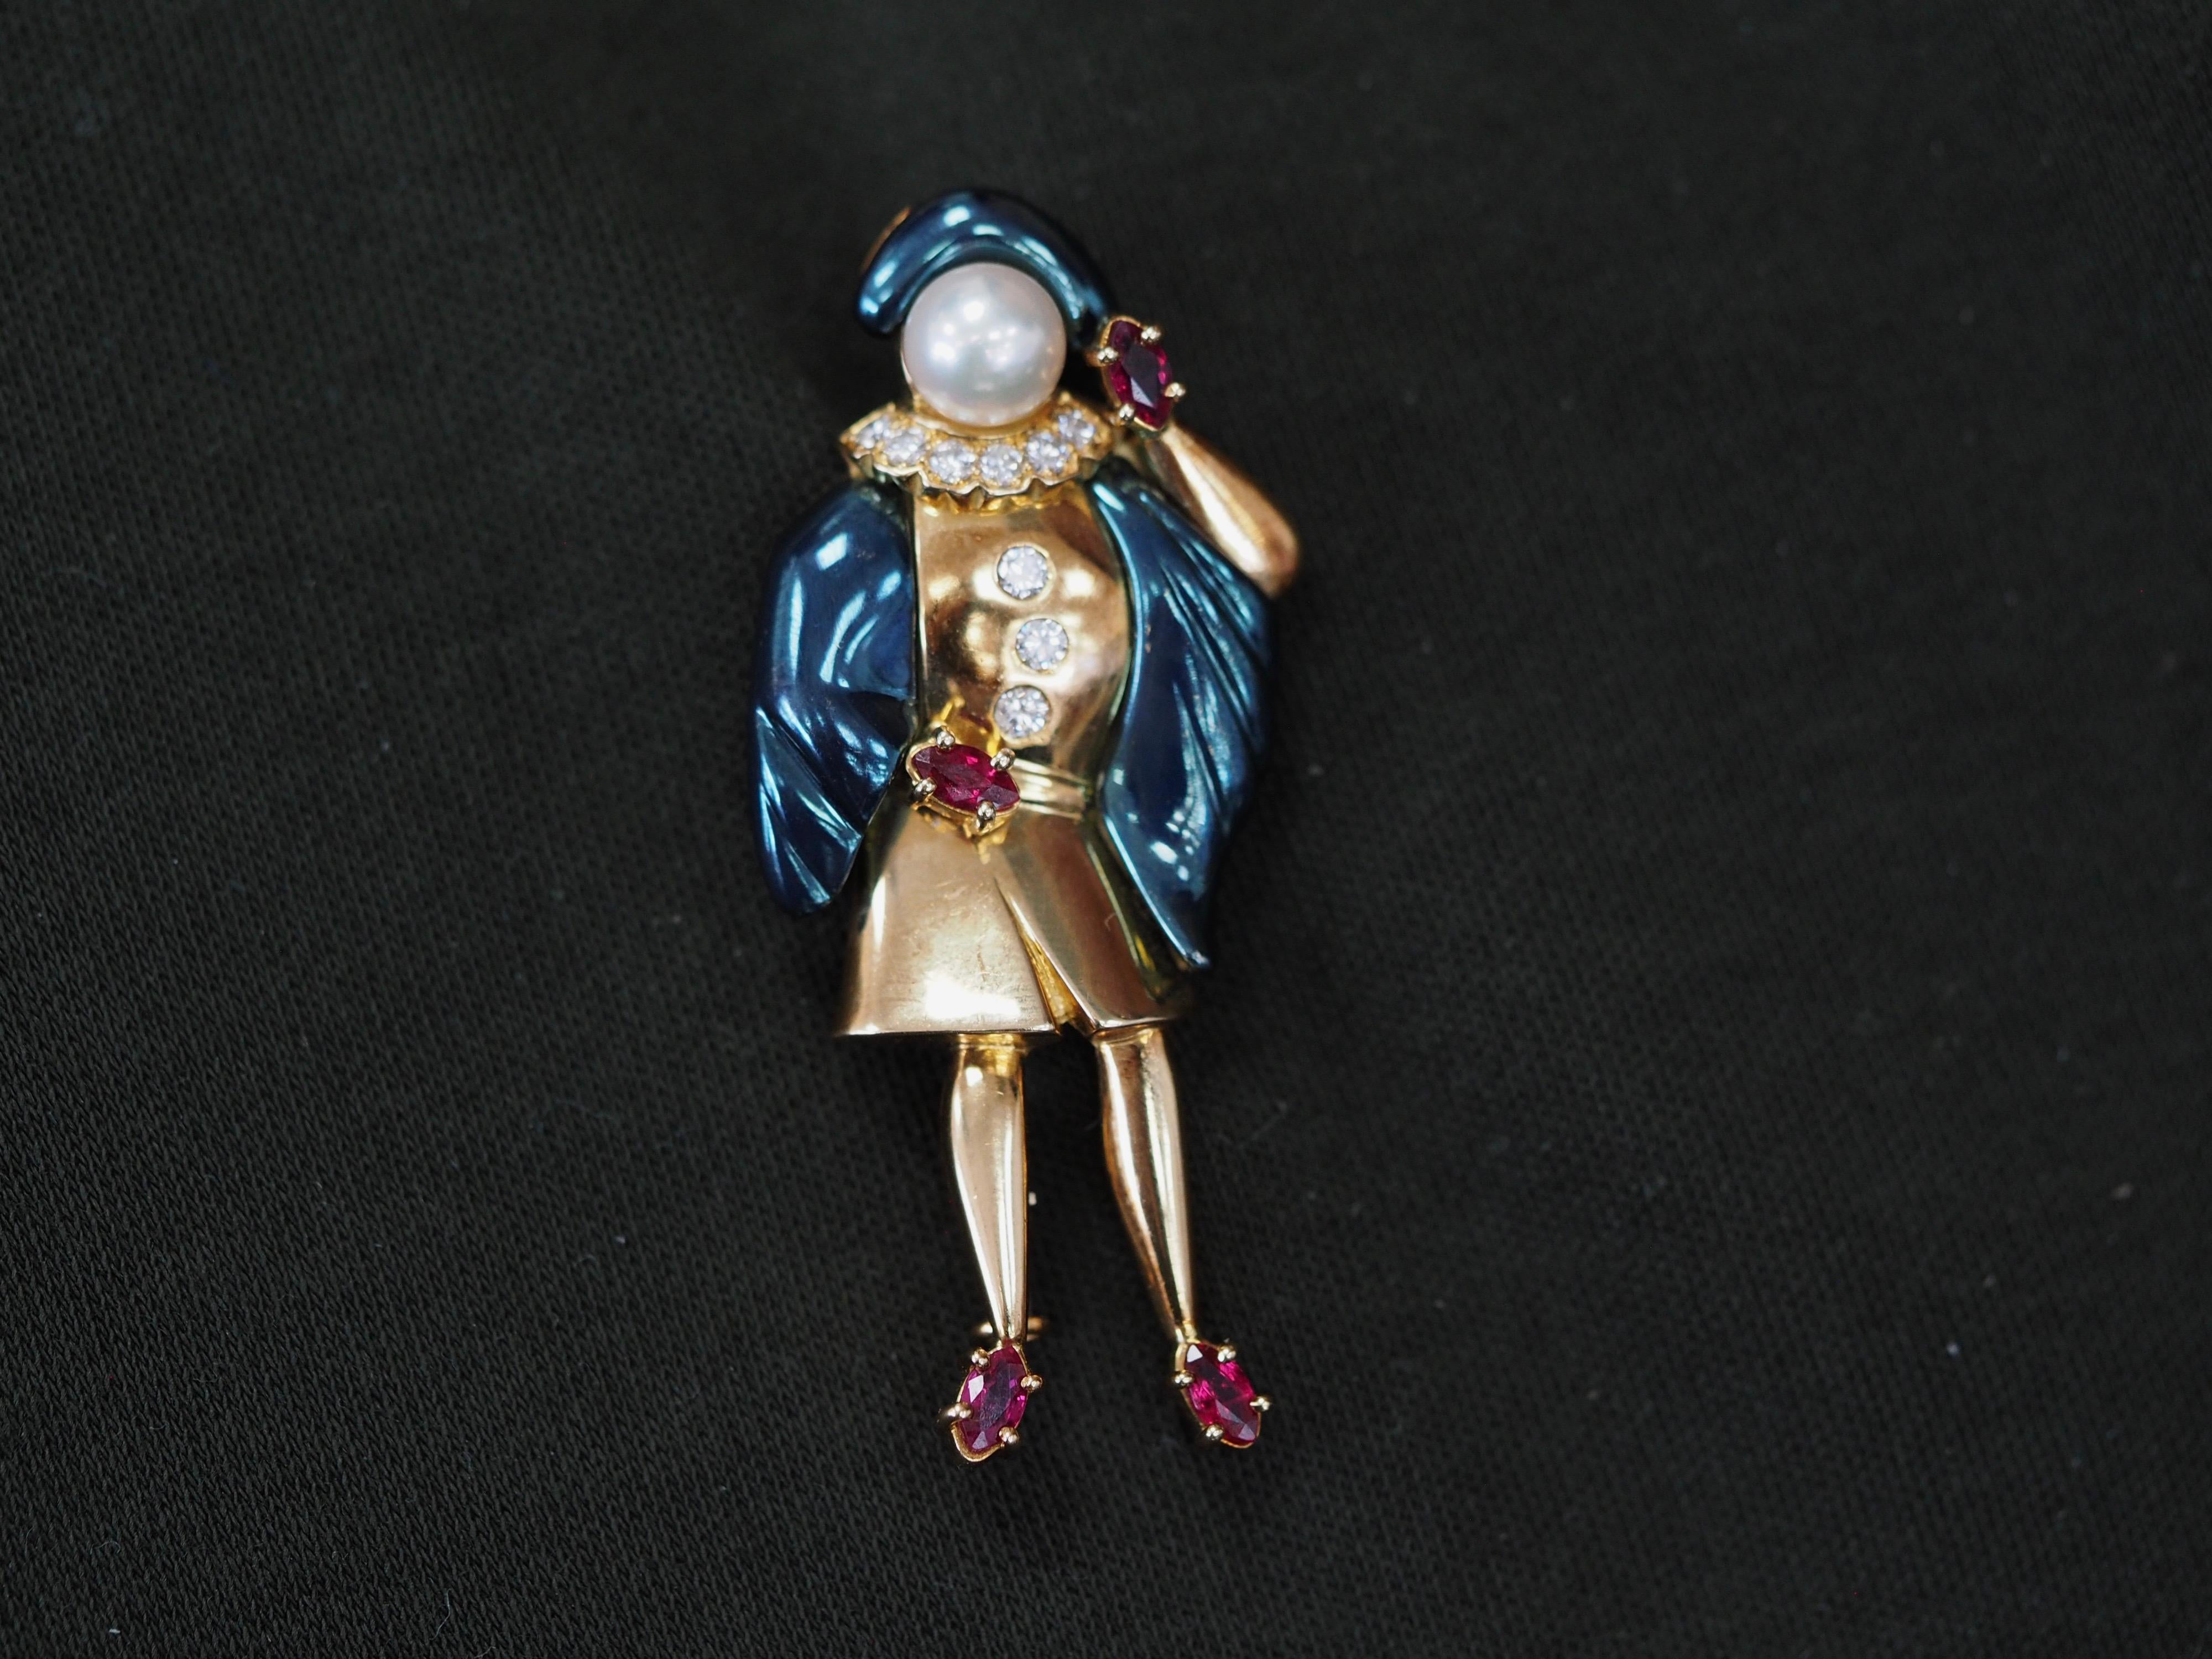 Round Cut Ludwig Müller 18 Karat Blue Gold Brooch with Diamonds, Rubies and Pearls